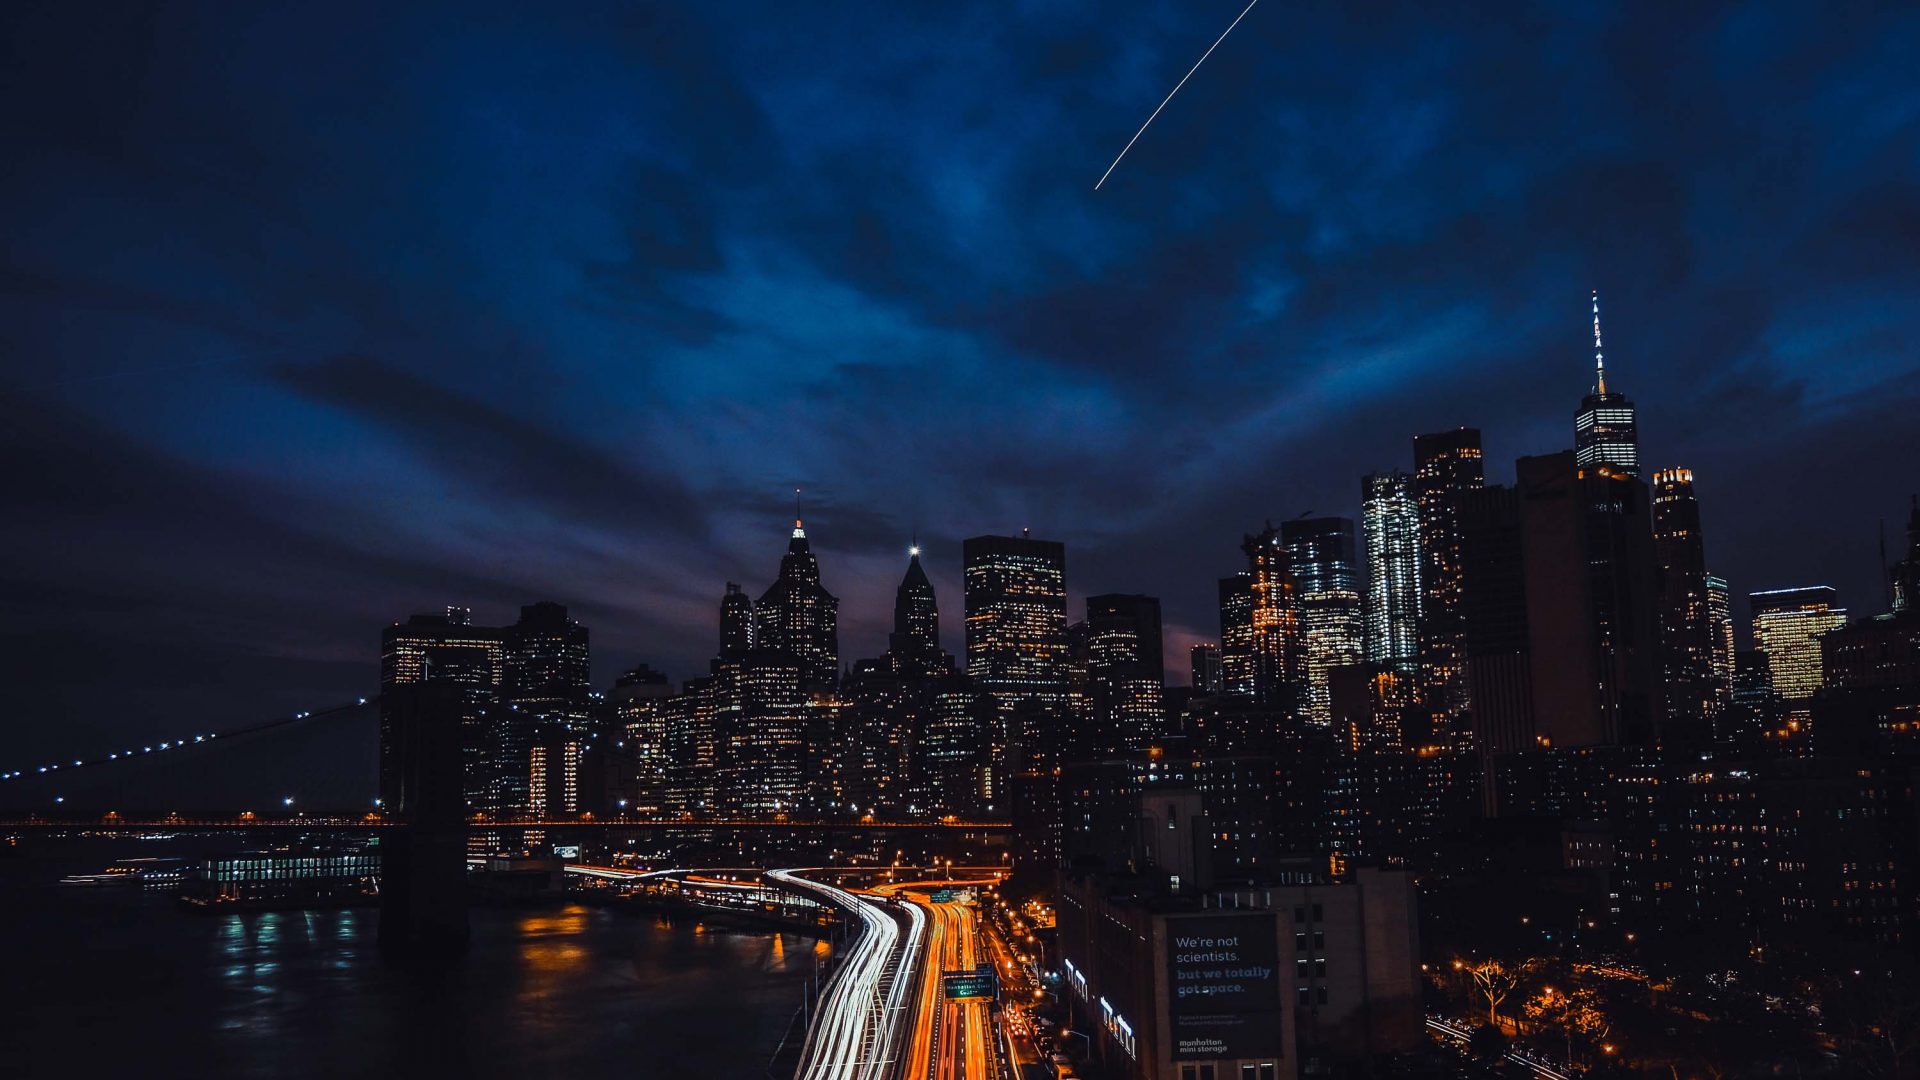 New York City is lit up with lights on buildings and roads at night.